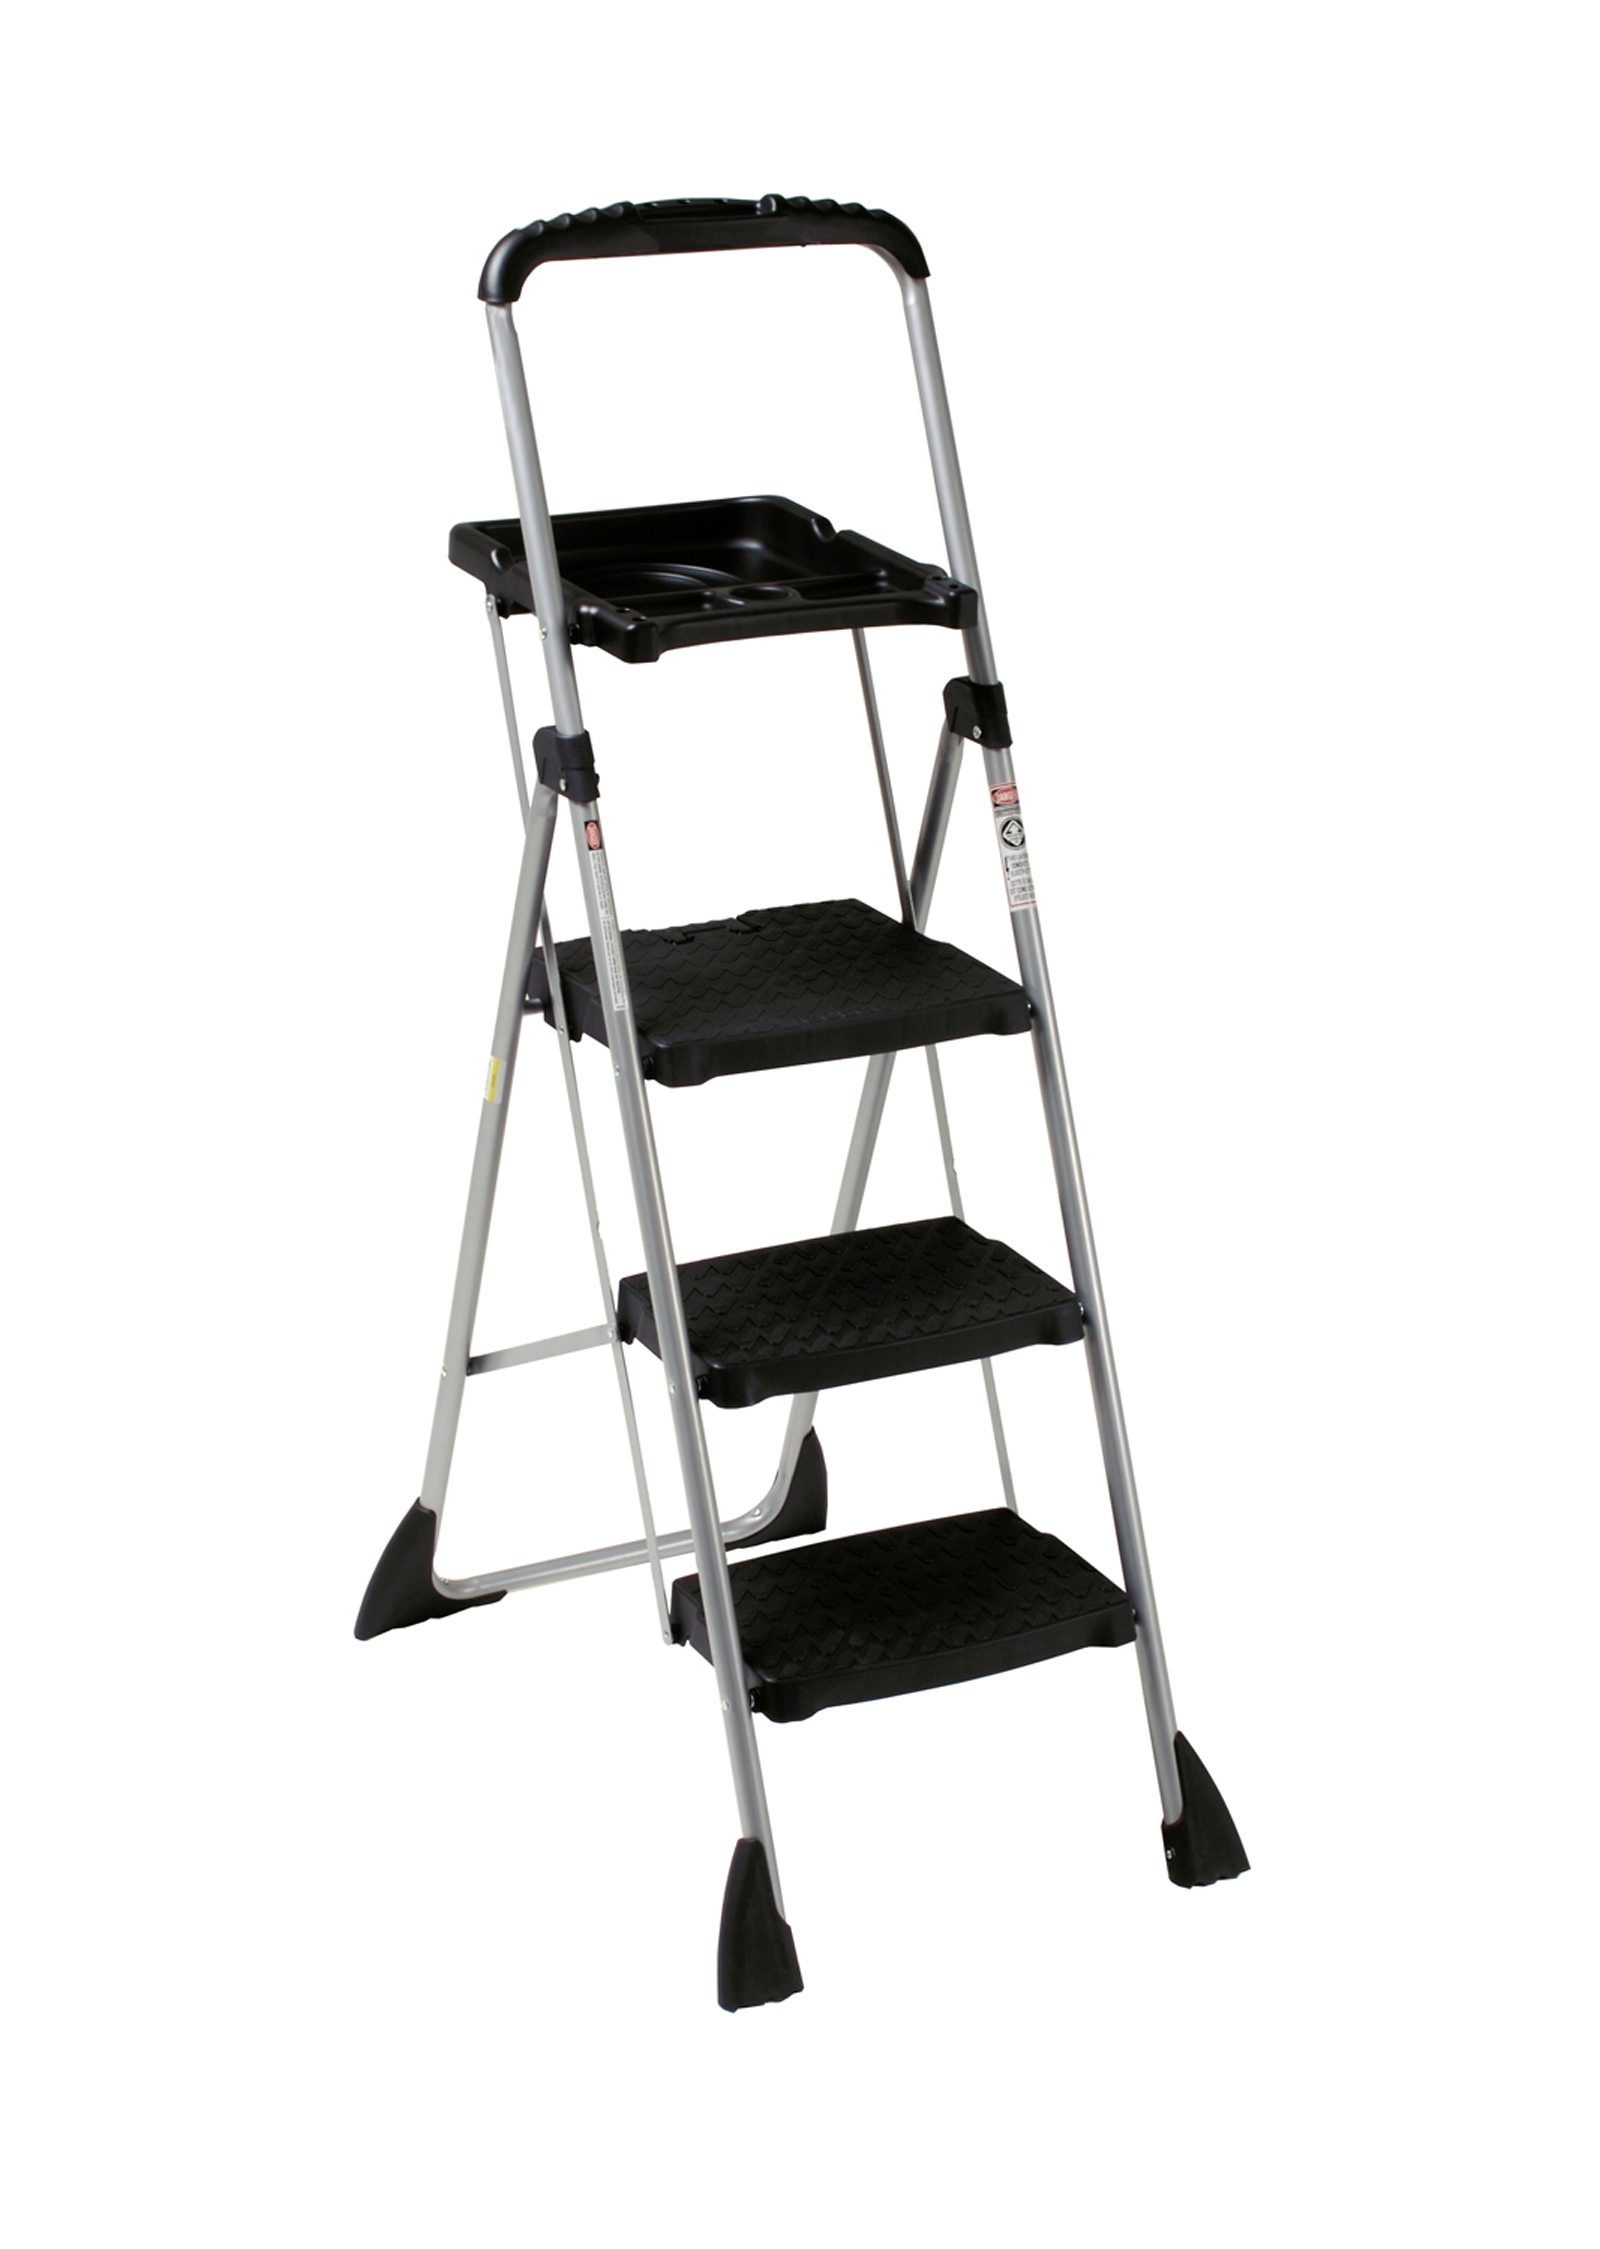 Cosco Home and Office Products Three Step Max Work Platform Step Ladder